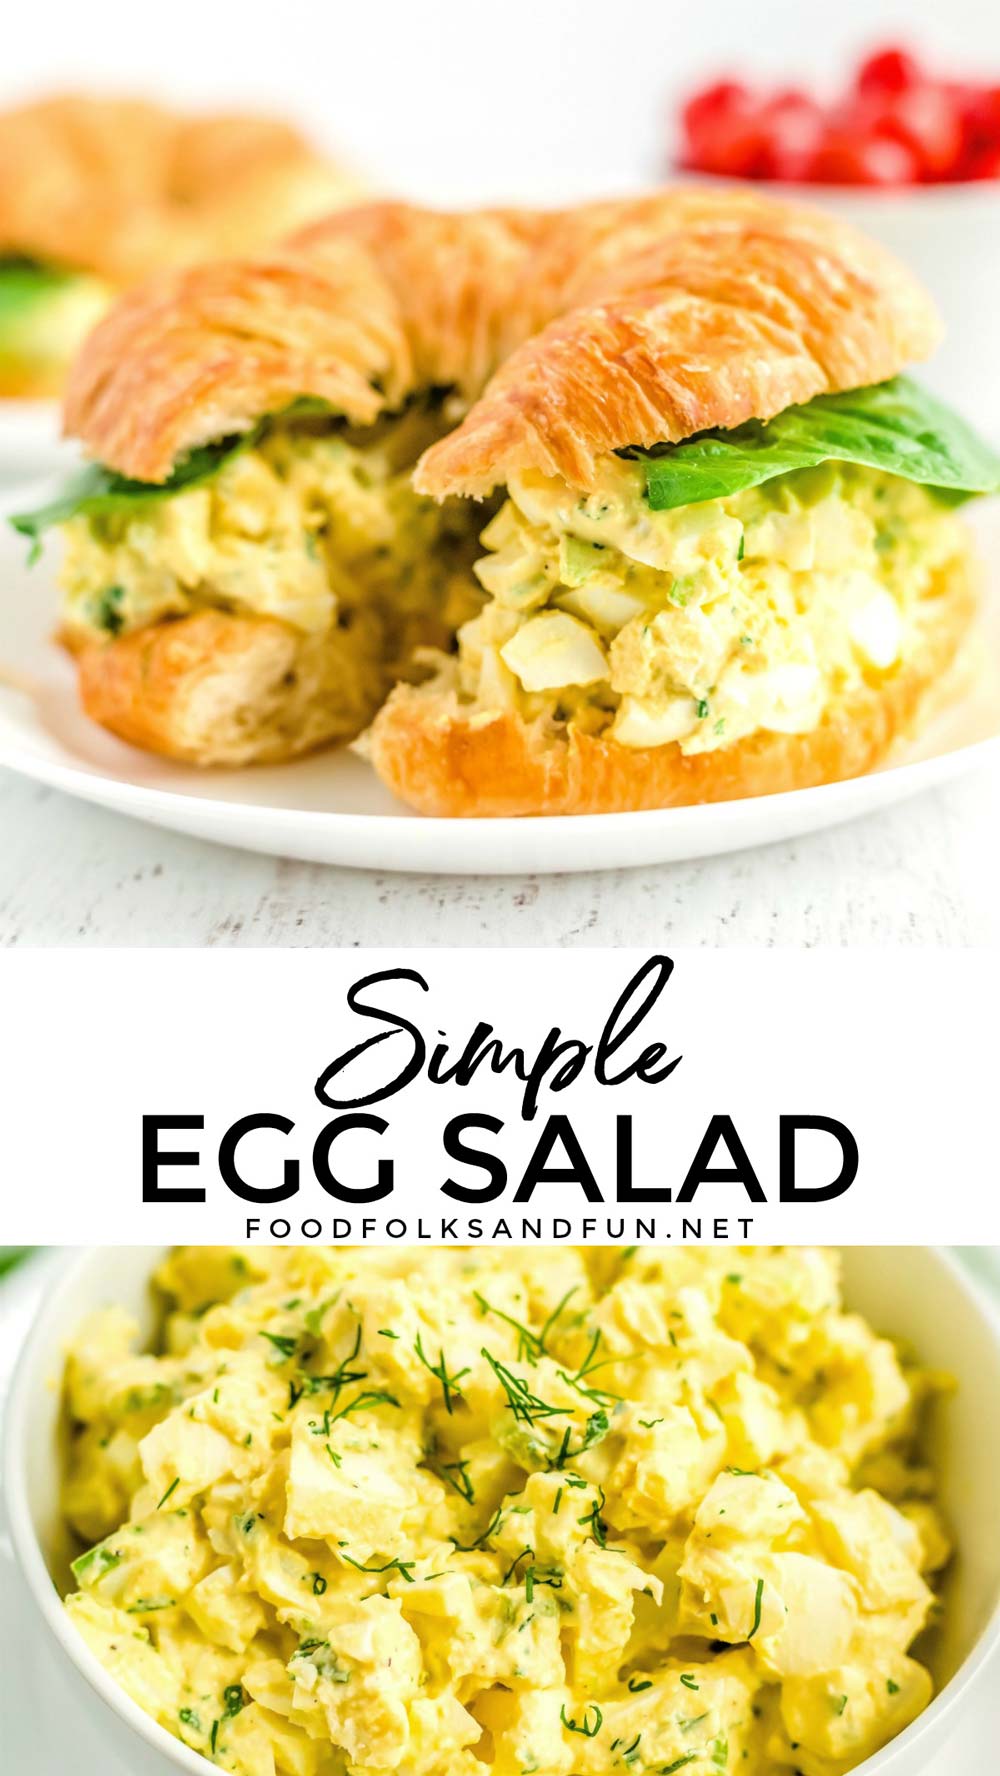 This Egg Salad Recipe With Dill is creamy and has just the right balance of crunchy celery and bright herbs. It's perfect served on croissants for sandwiches. via @foodfolksandfun